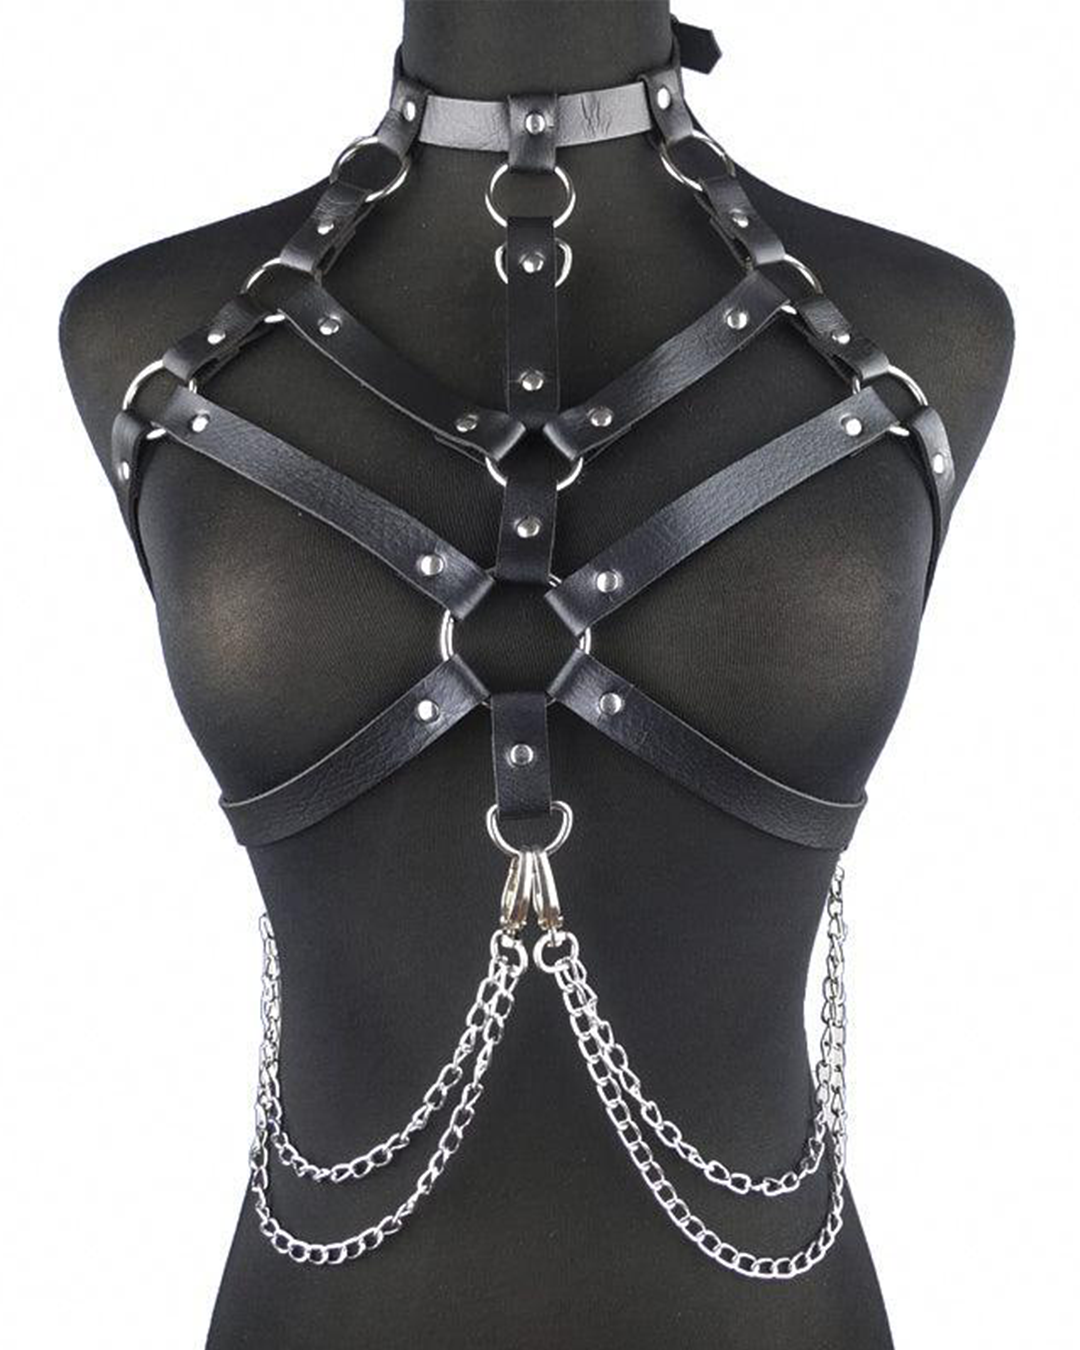 Chest Harness-830